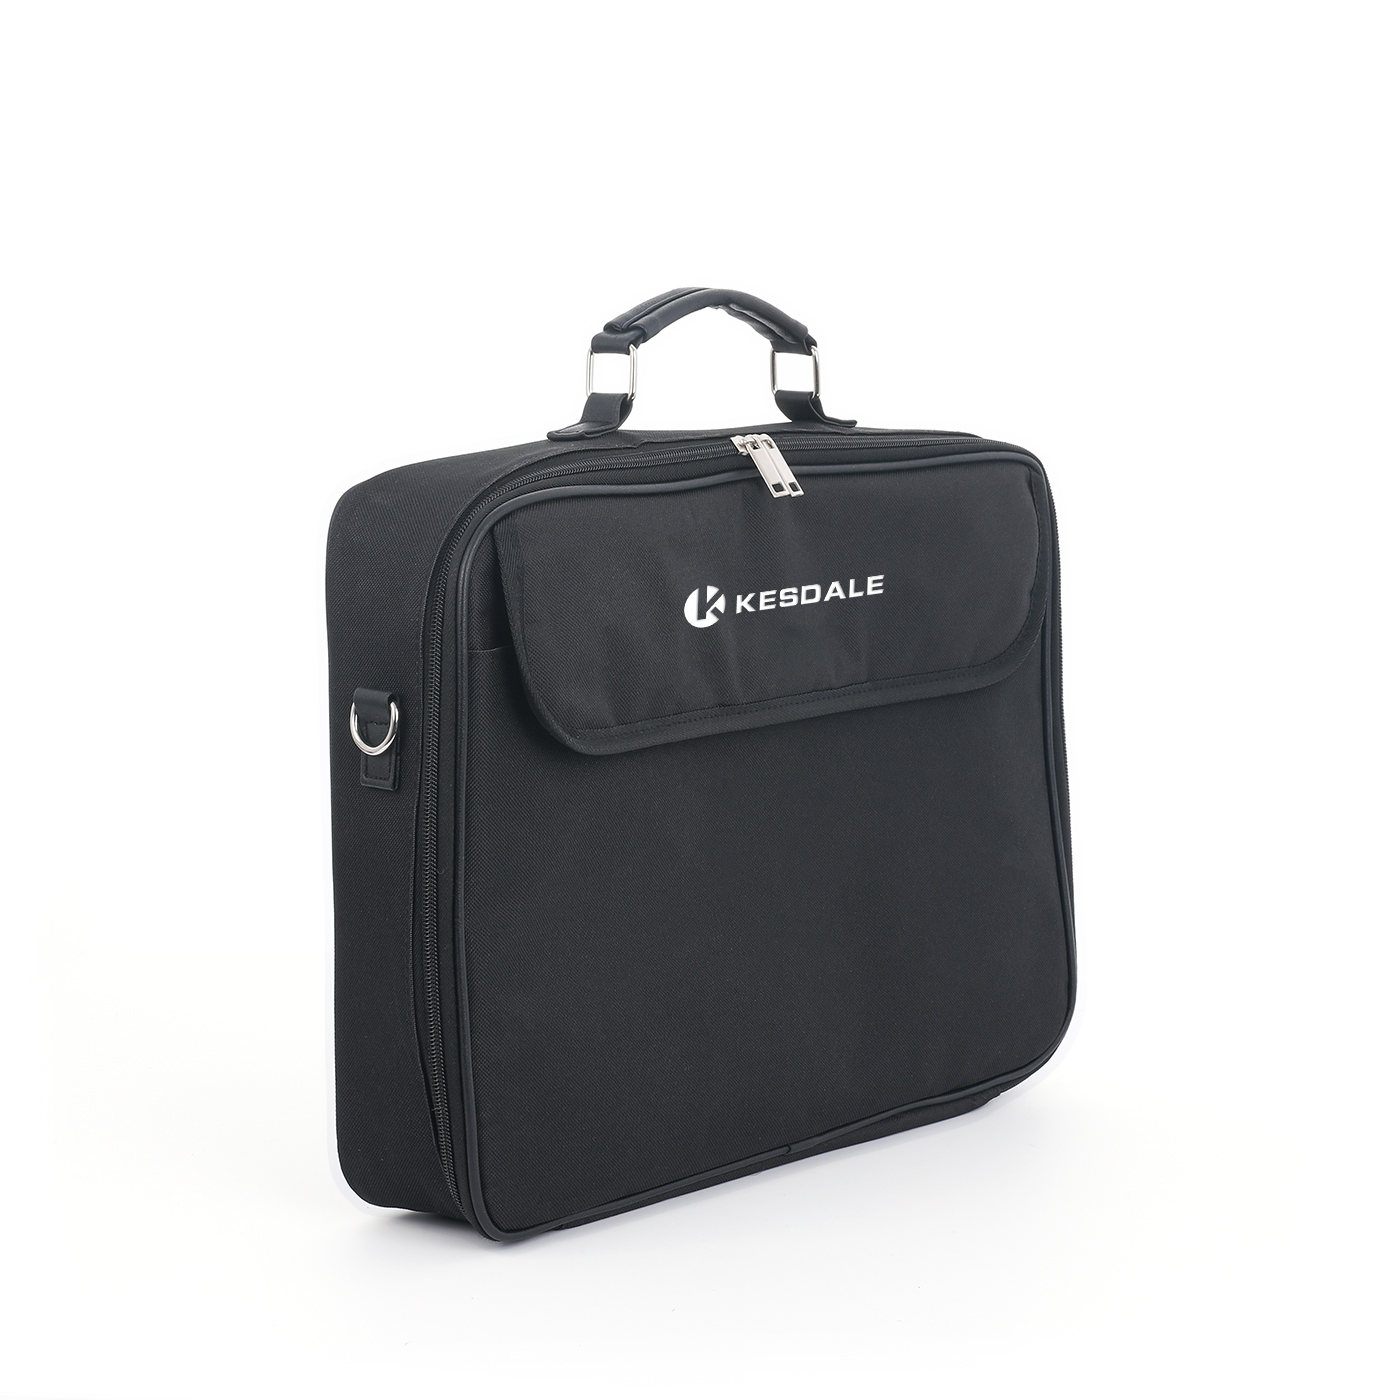 Laptop Bag With Handle